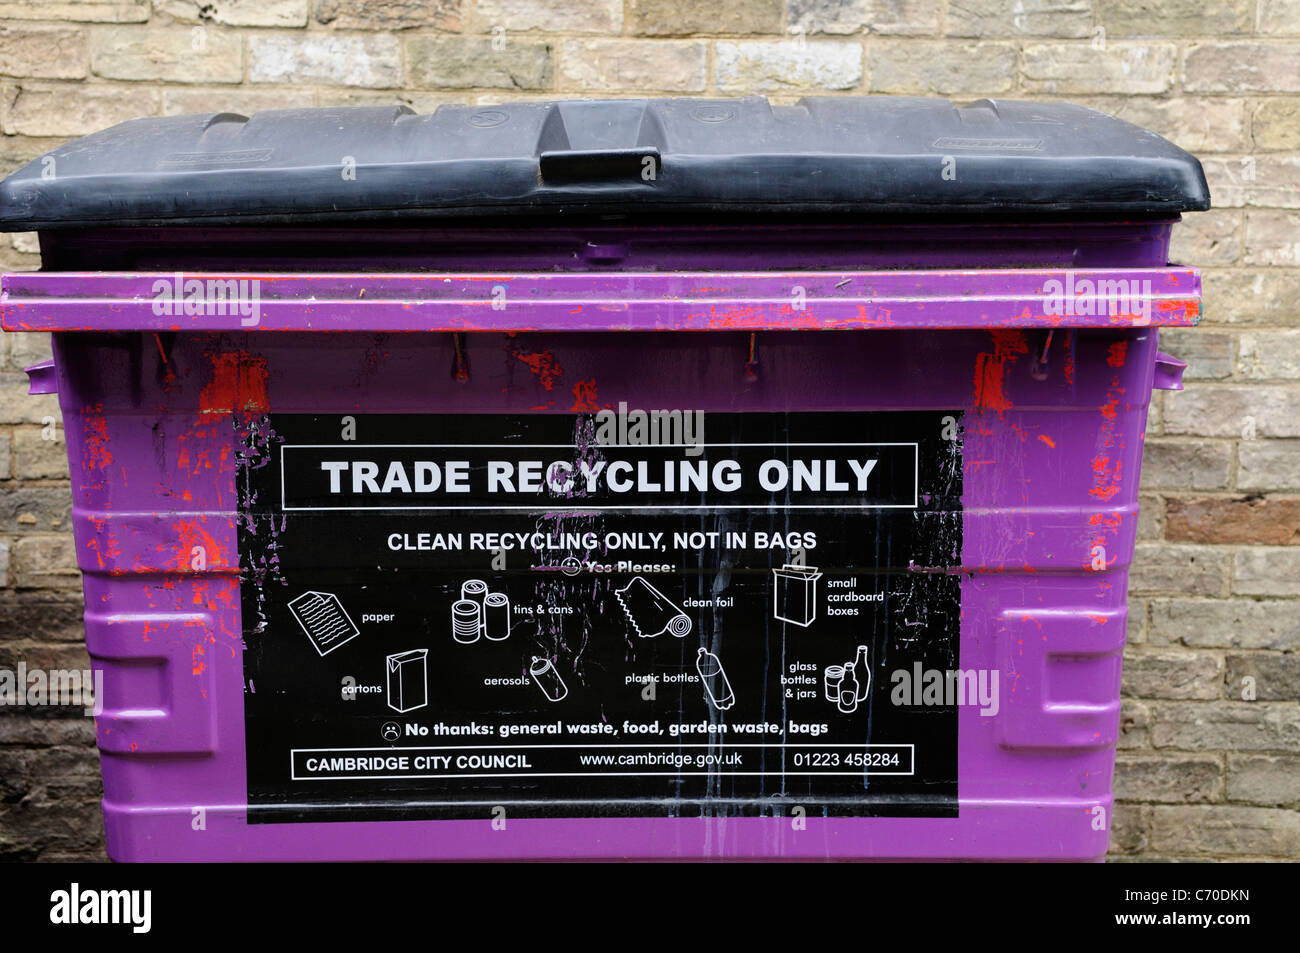 Trade Recycling Only Waste Bin, Cambridge, England, UK Stock Photo